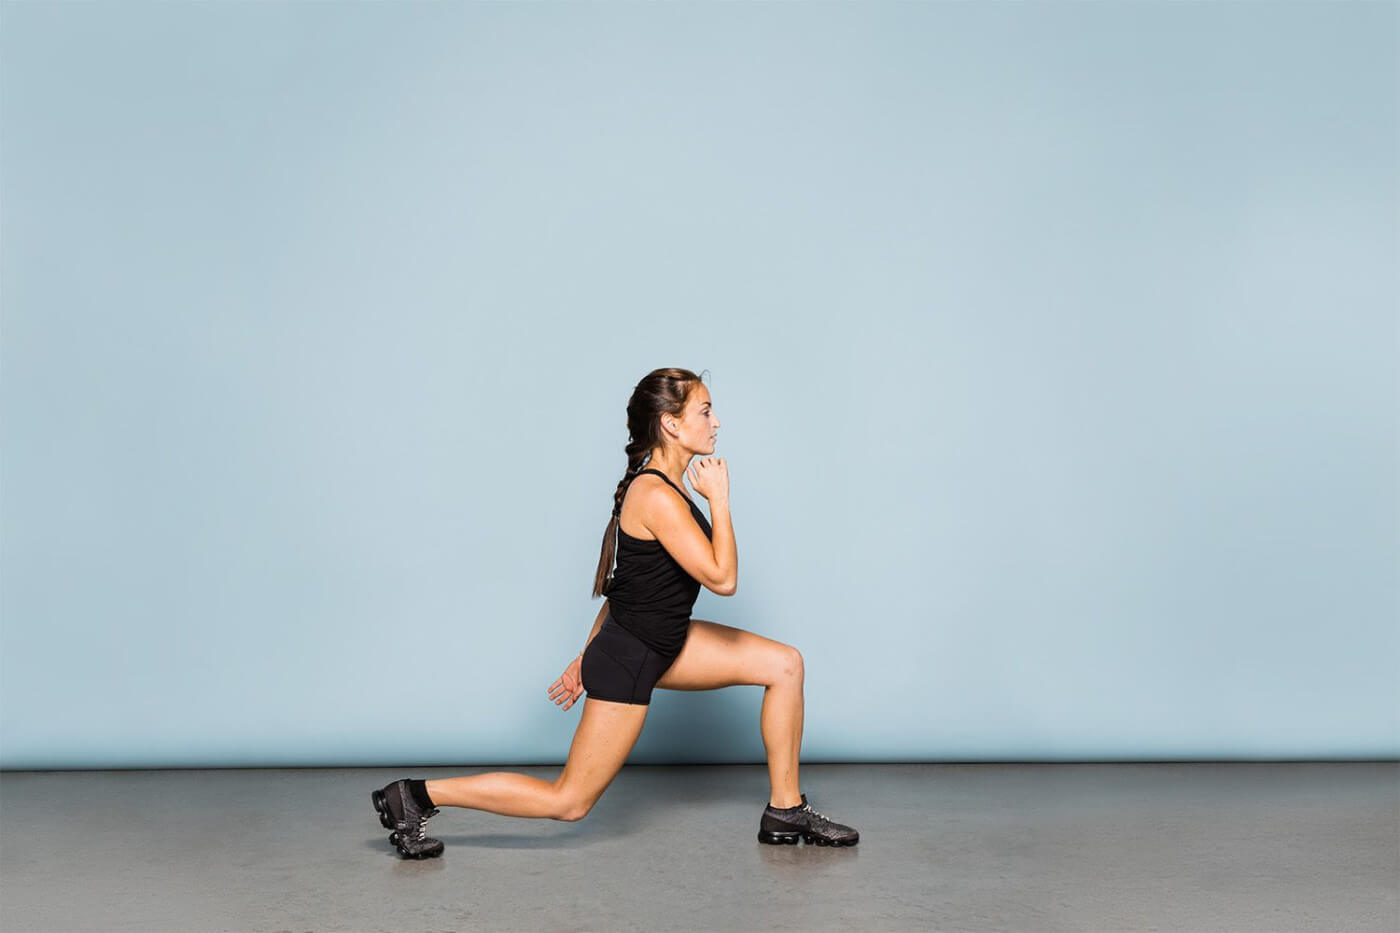 Knee Pain During Lunges? 3 Ways to Fix It